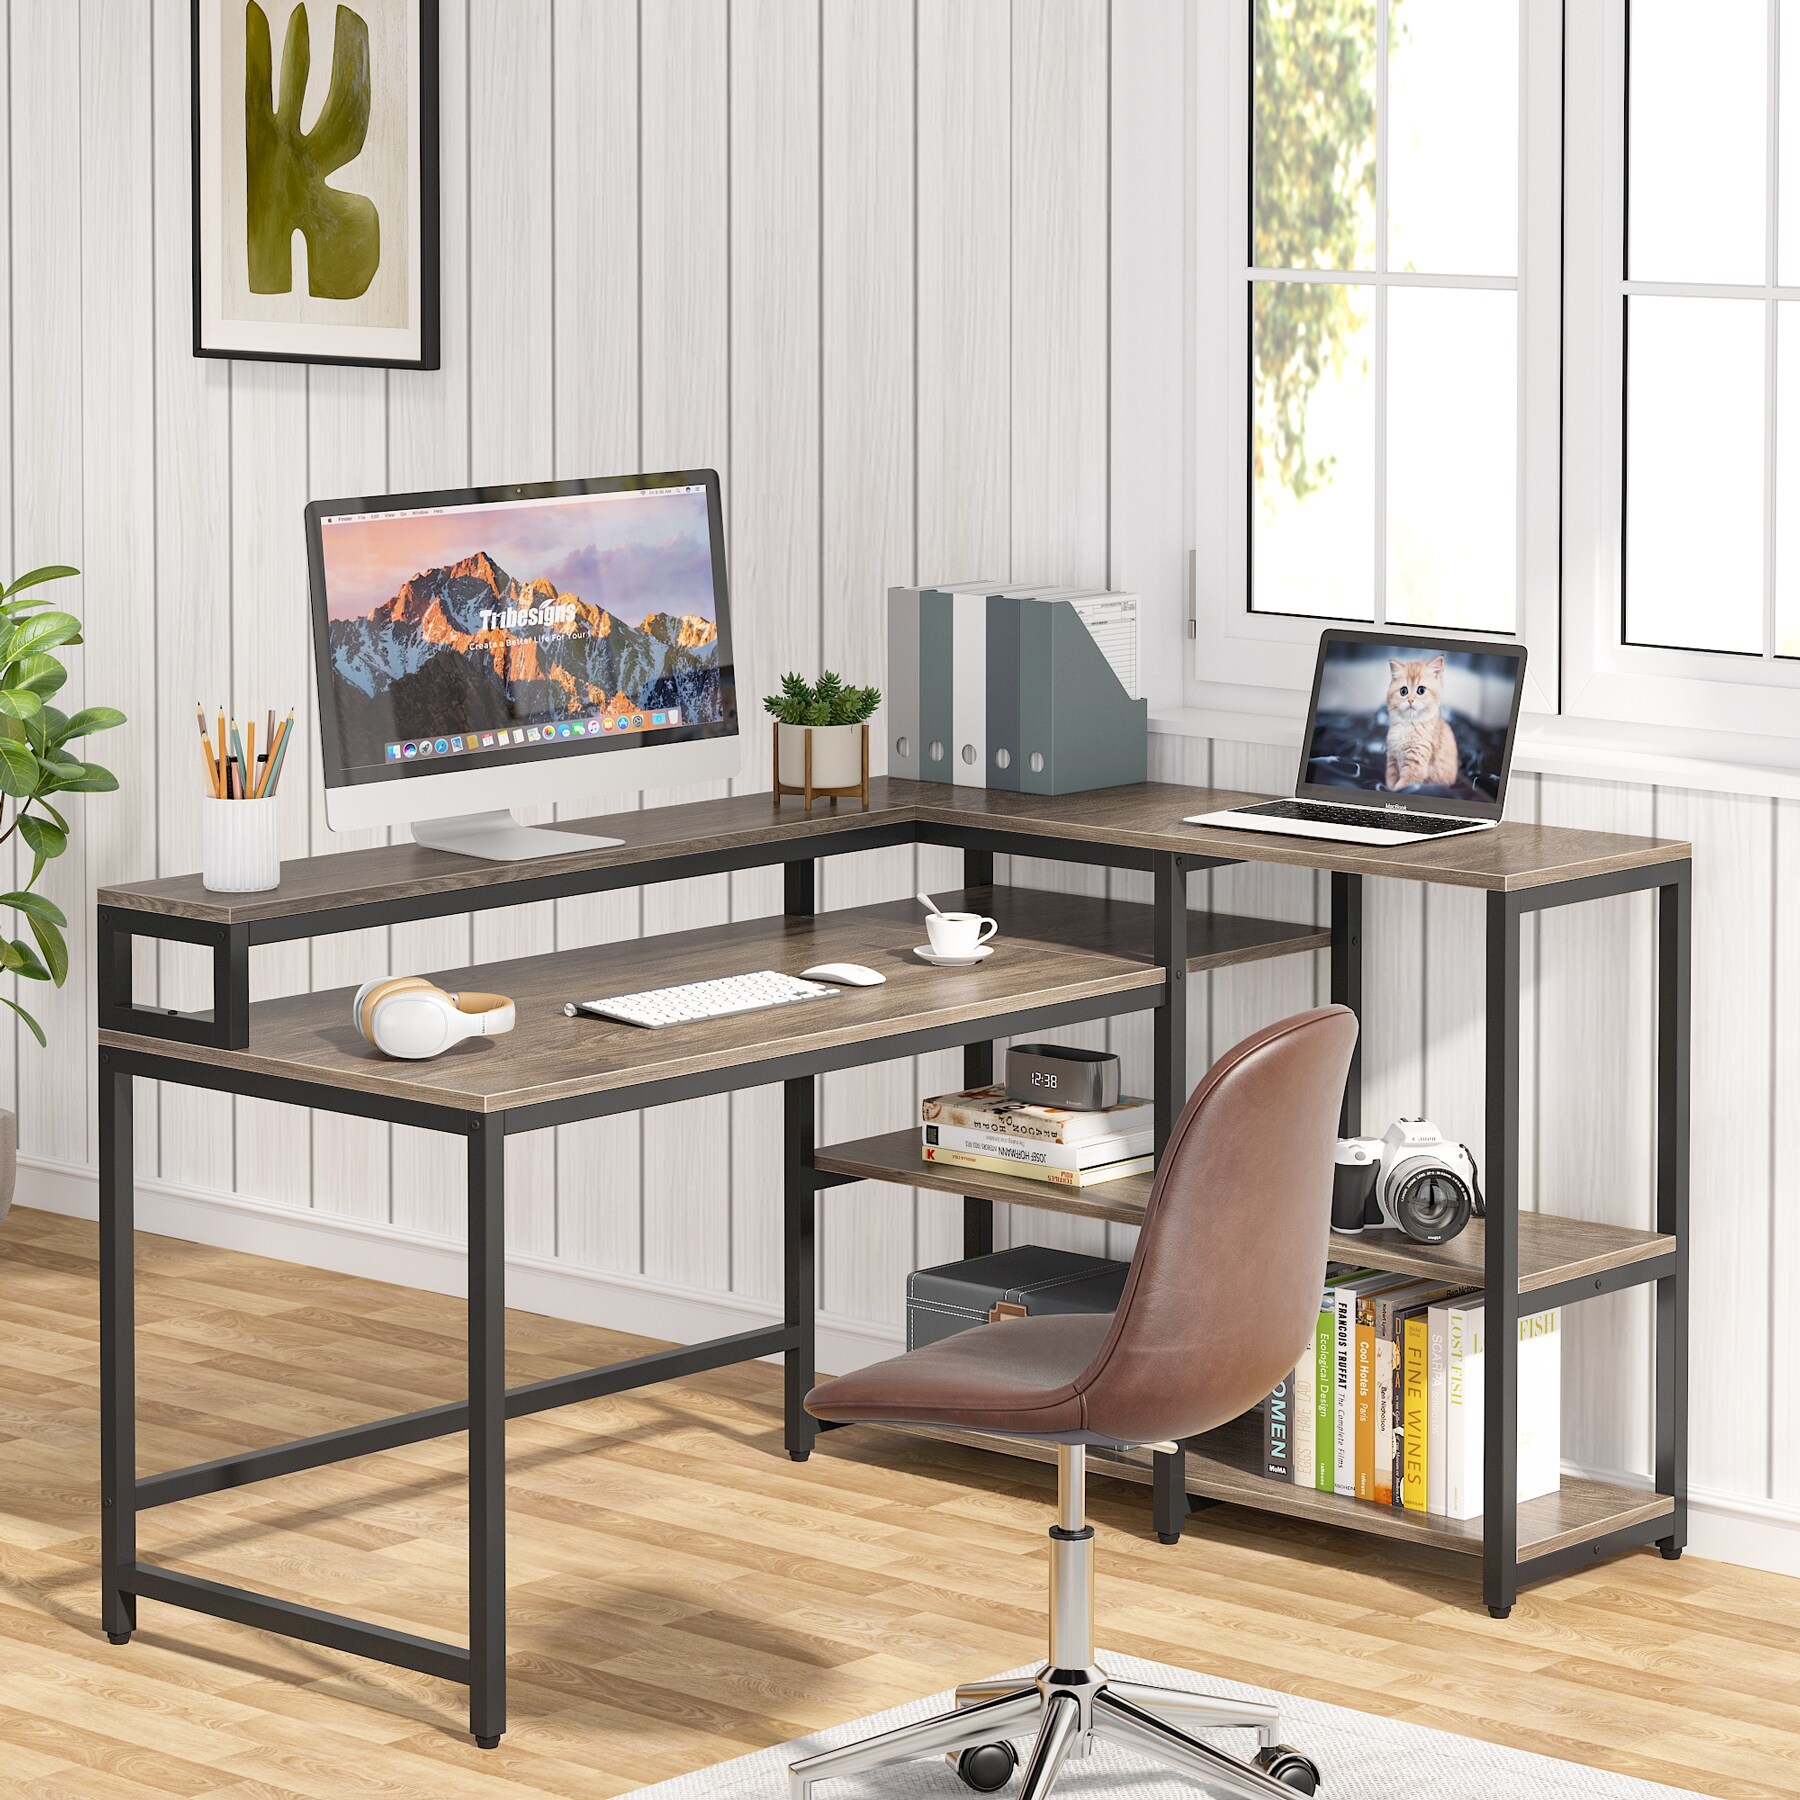 https://ak1.ostkcdn.com/images/products/is/images/direct/7c00ac15d527d653693902f0623e0fdba0745817/Reversible-L-Shaped-Computer-Desk-with-Storage-Shelf-and-Monitor-Stand.jpg